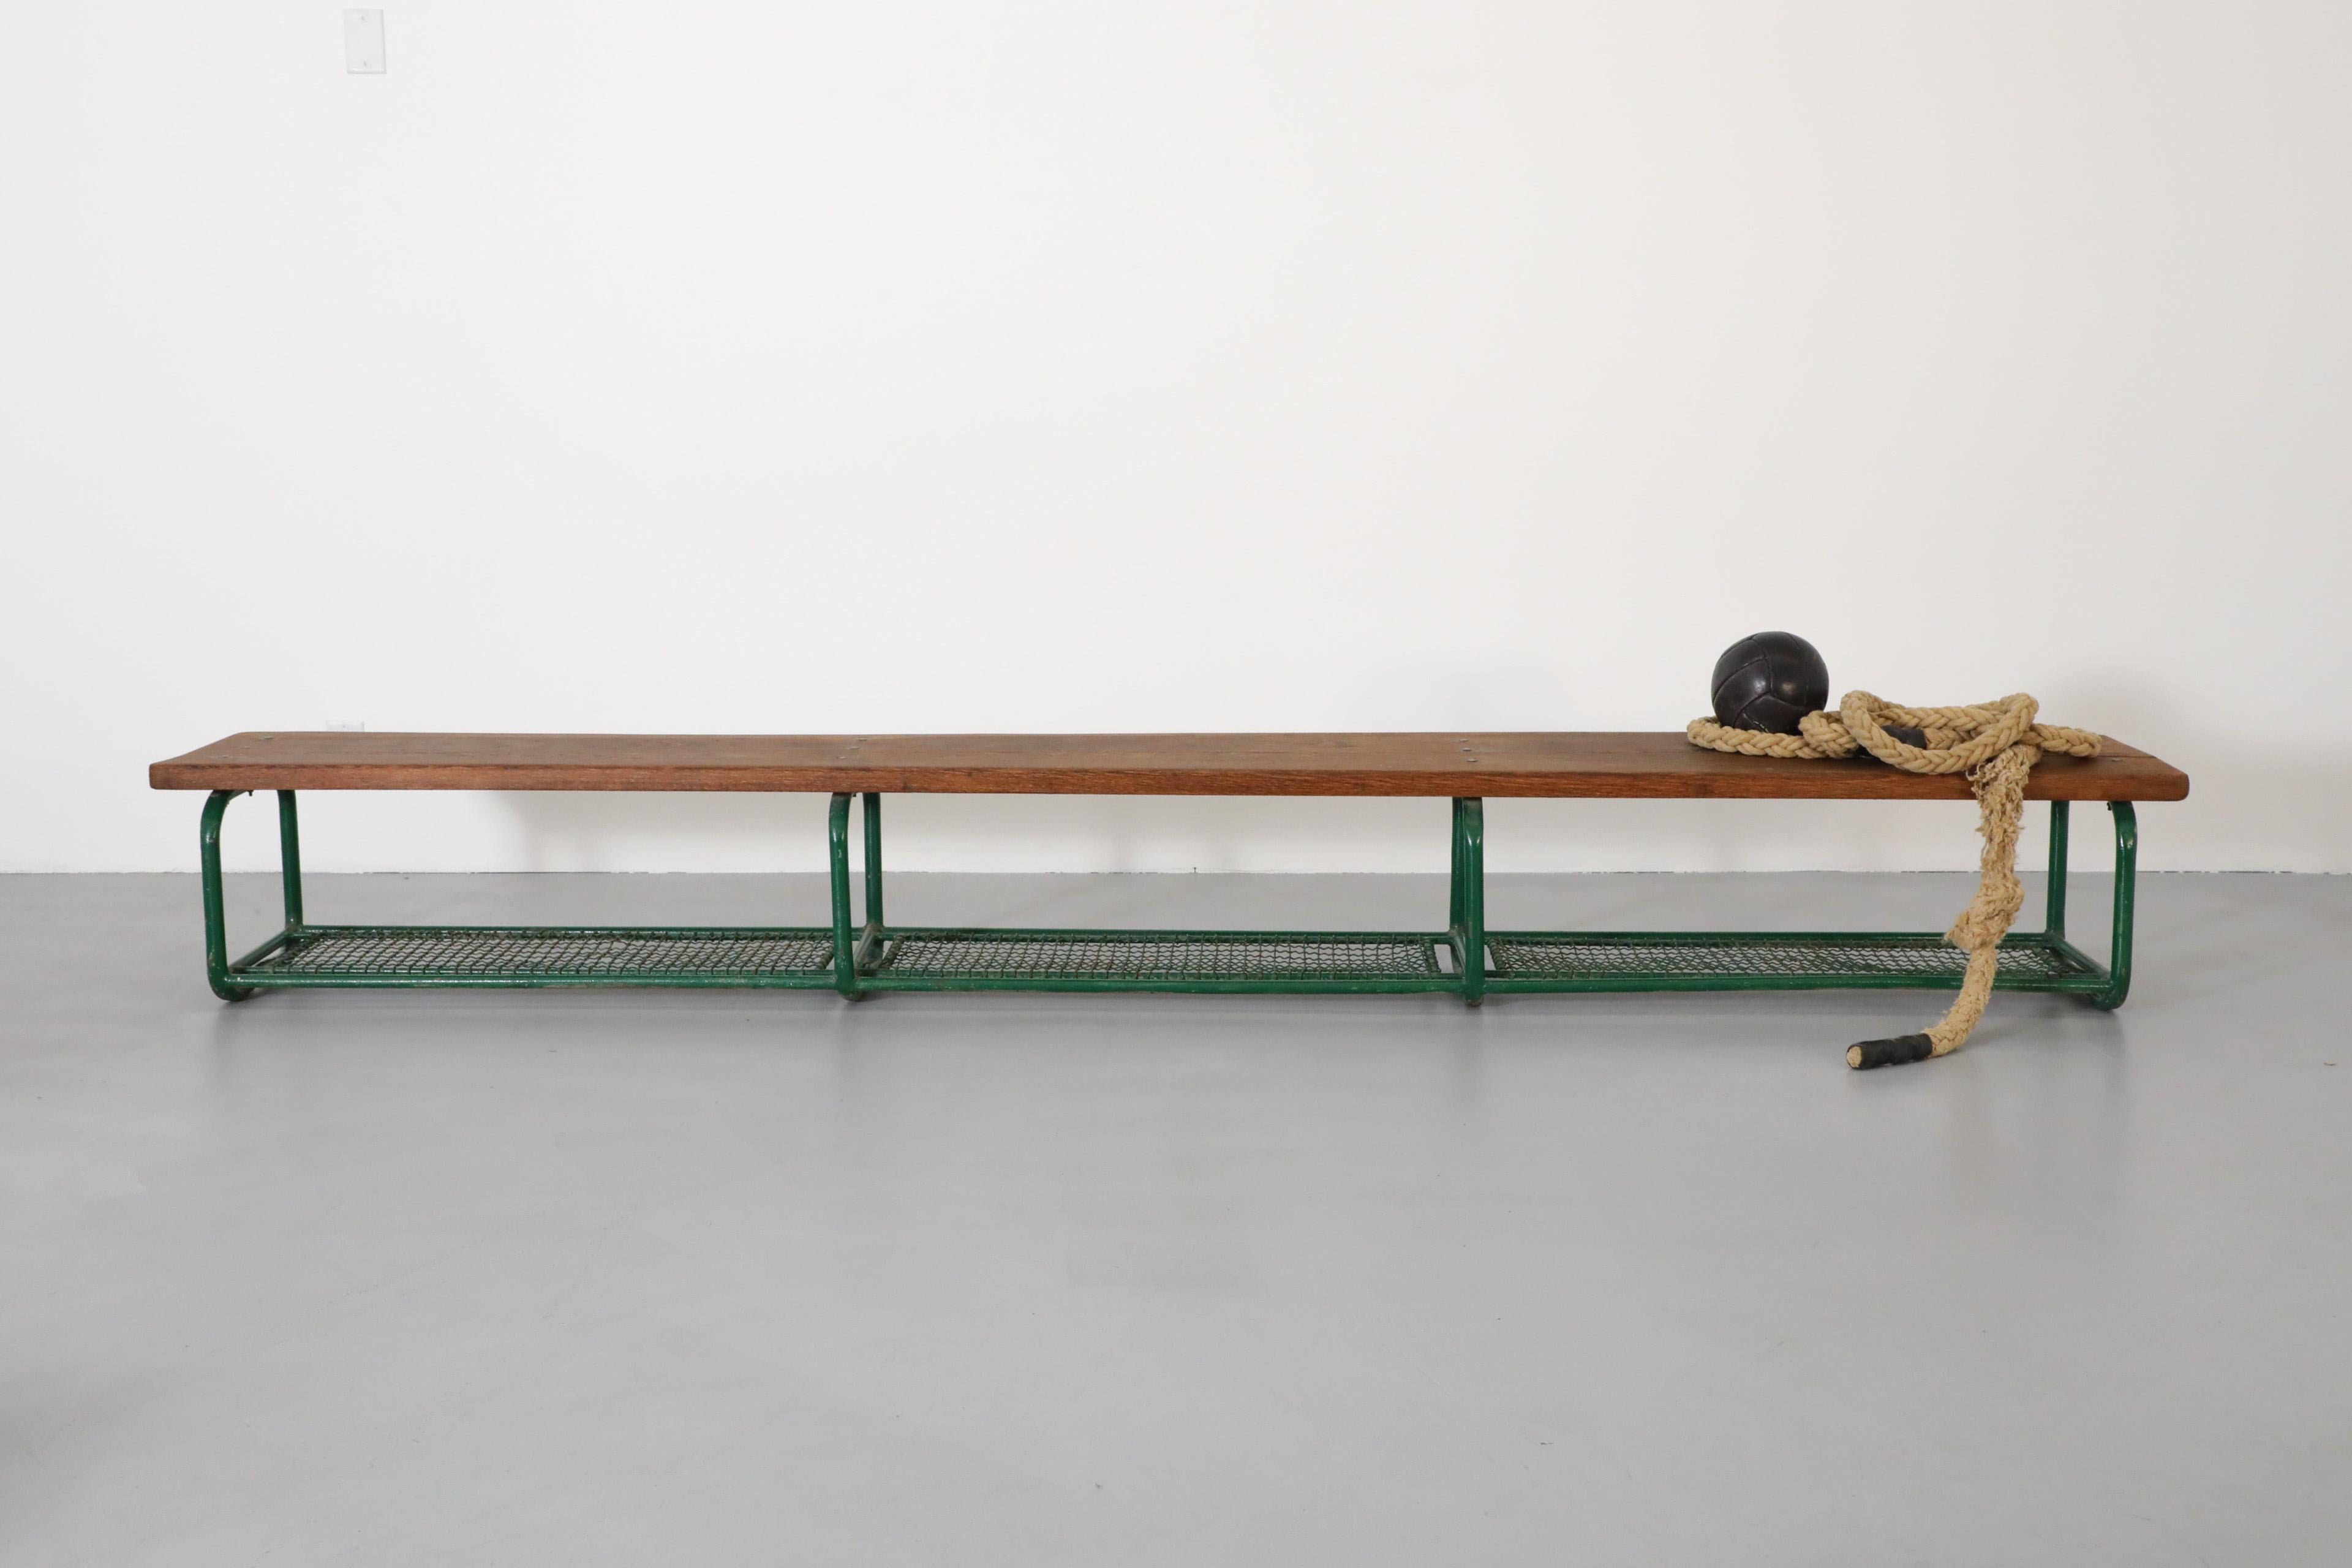 Vintage gymnasium bench with green enameled metal legs and lower basket shelf and solid oak dark stained top. Originally used to house soccer balls and sports equipment. In original condition with visible wear consistent with its age and use.